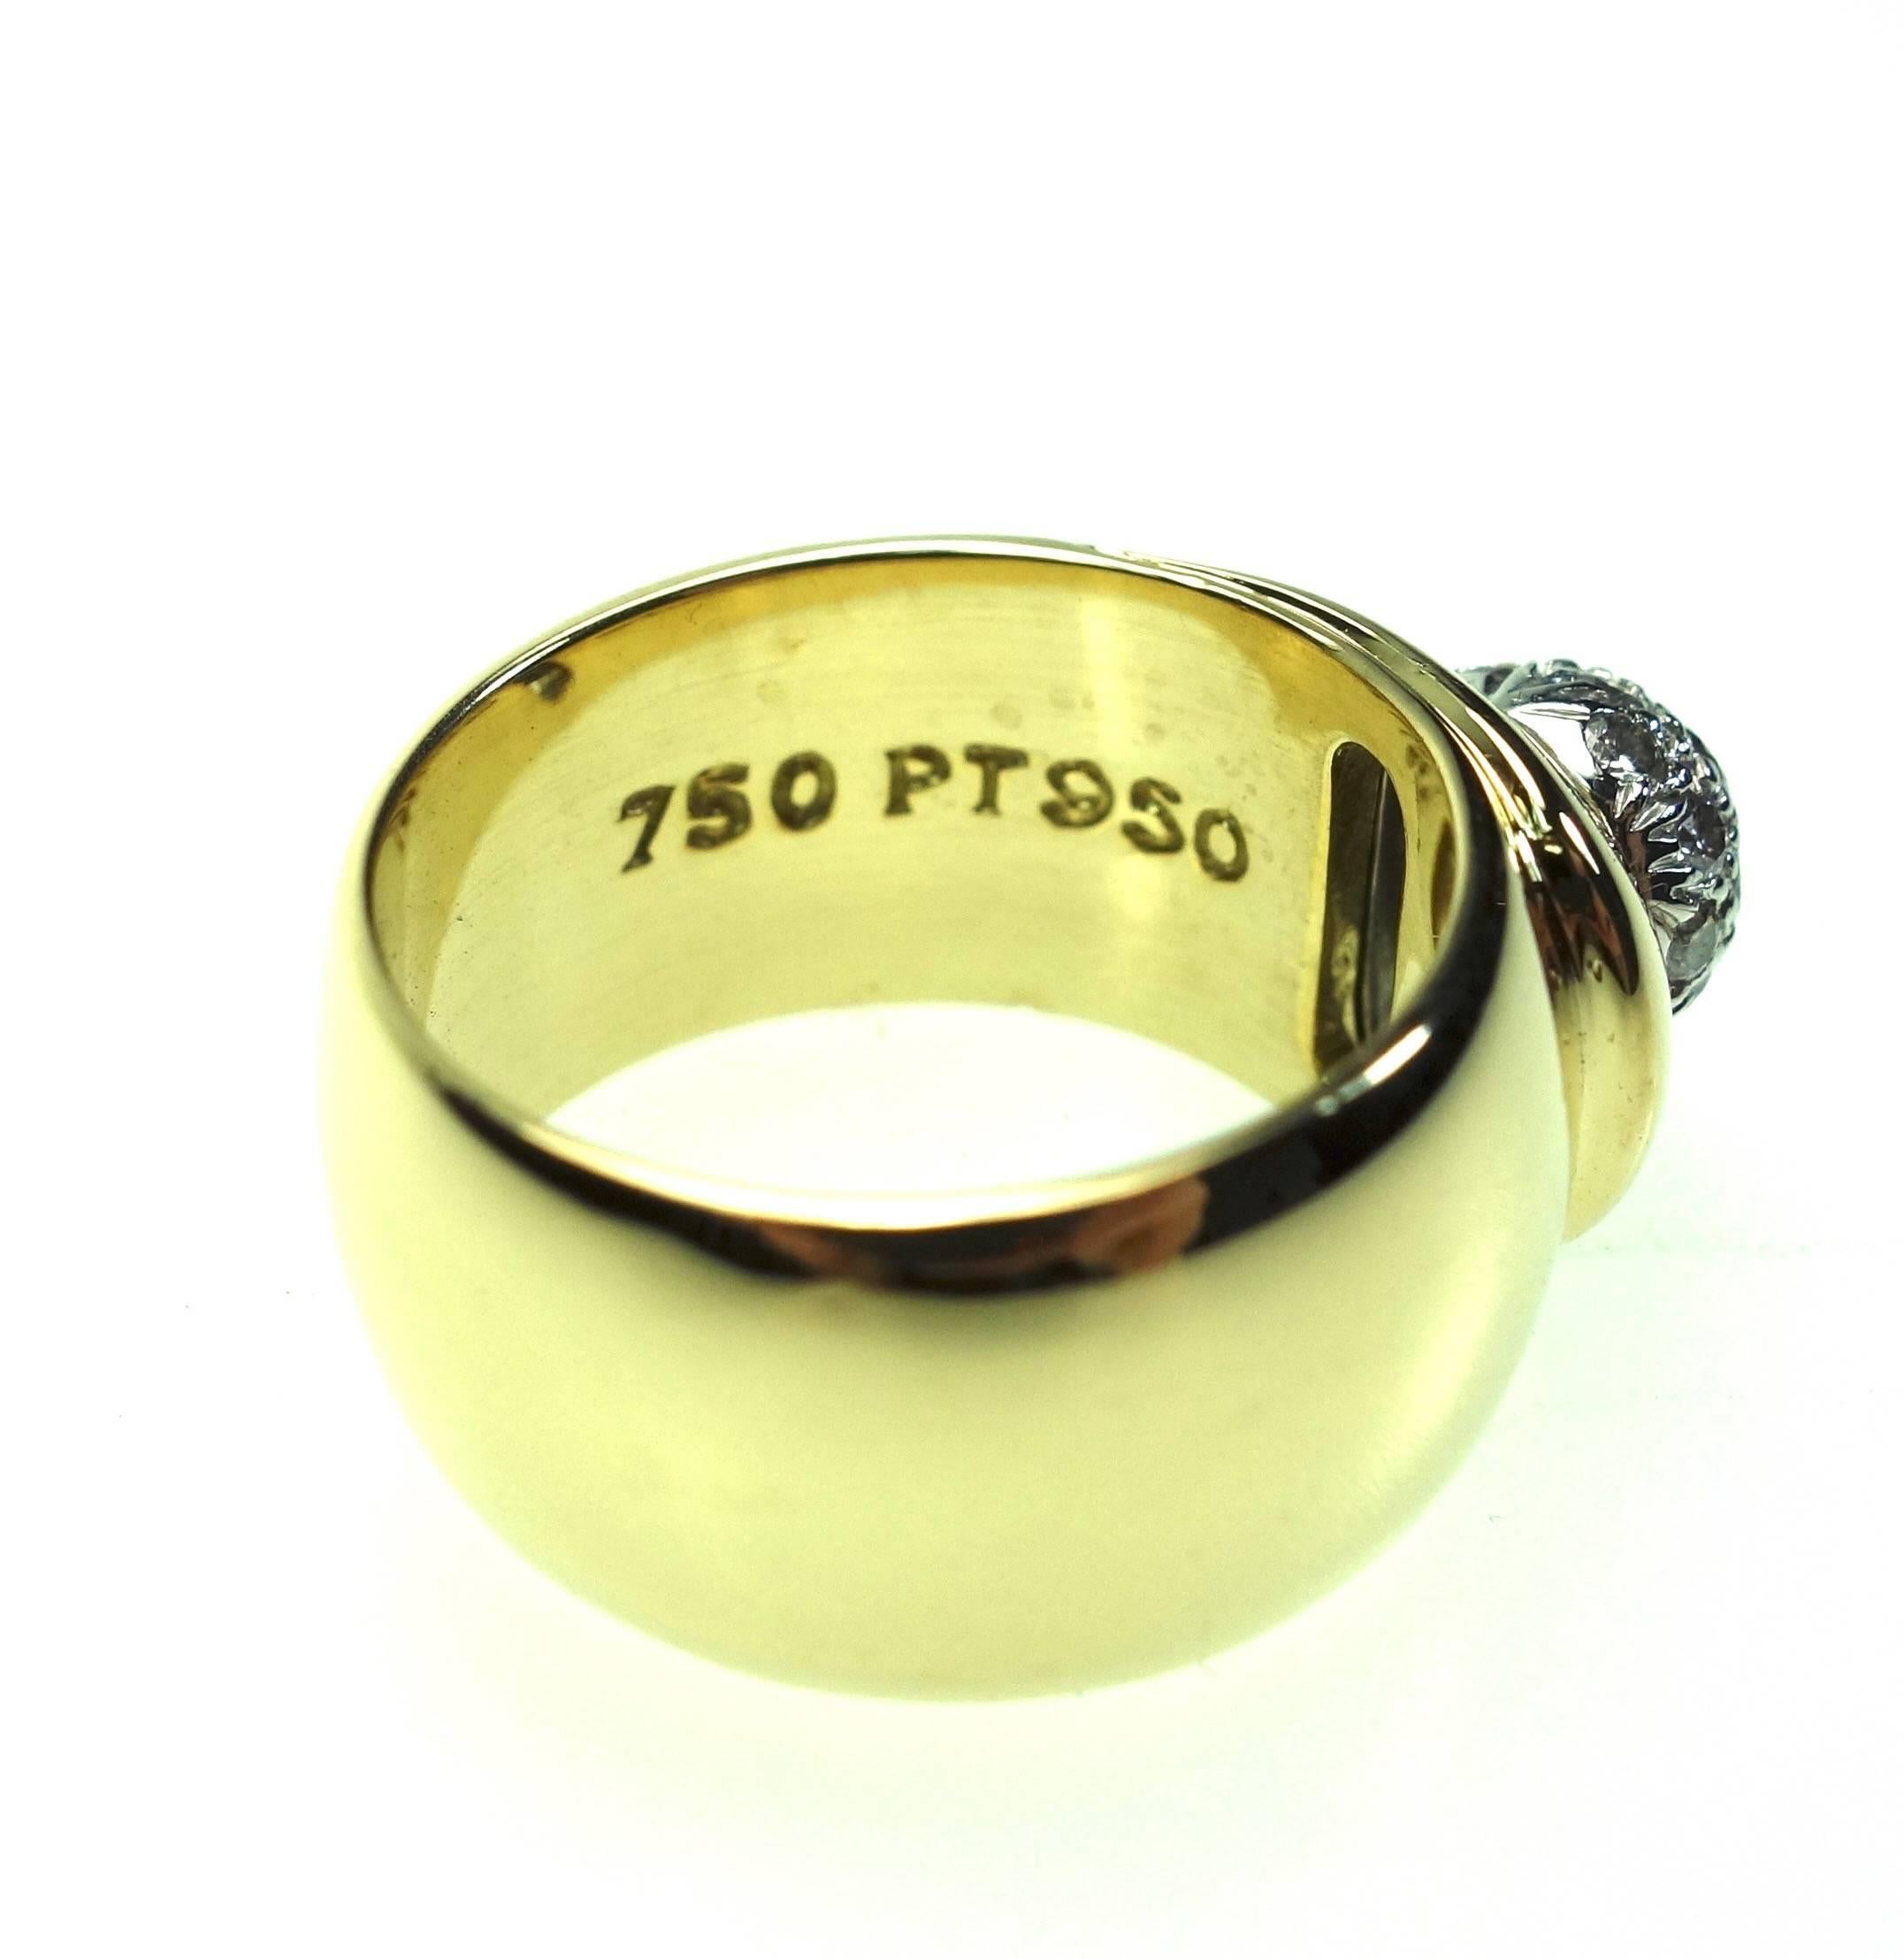 Vintage Tiffany & Co. ring from 1980 is a stunner. The 18k yellow gold 9.5 mm wide band features a platinum pave set diamond ball set with 19 round brilliant cut diamonds, approximate total weight 0.50ct. 
Clarity: VS1-VS2, Color: F-G
Weight: 15.2